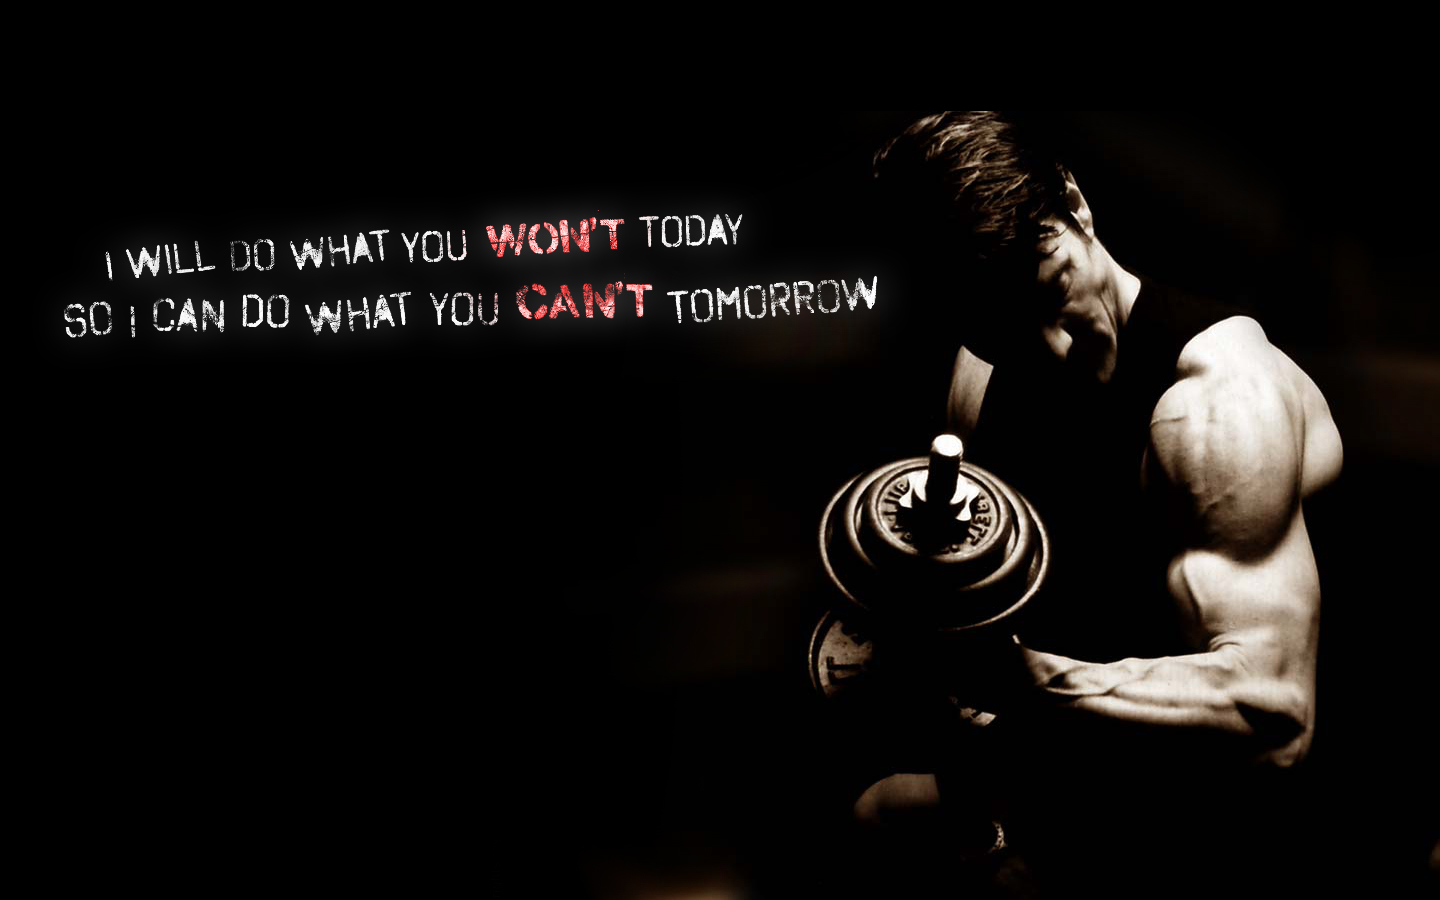 [97+] Gym Quotes Wallpapers On Wallpapersafari